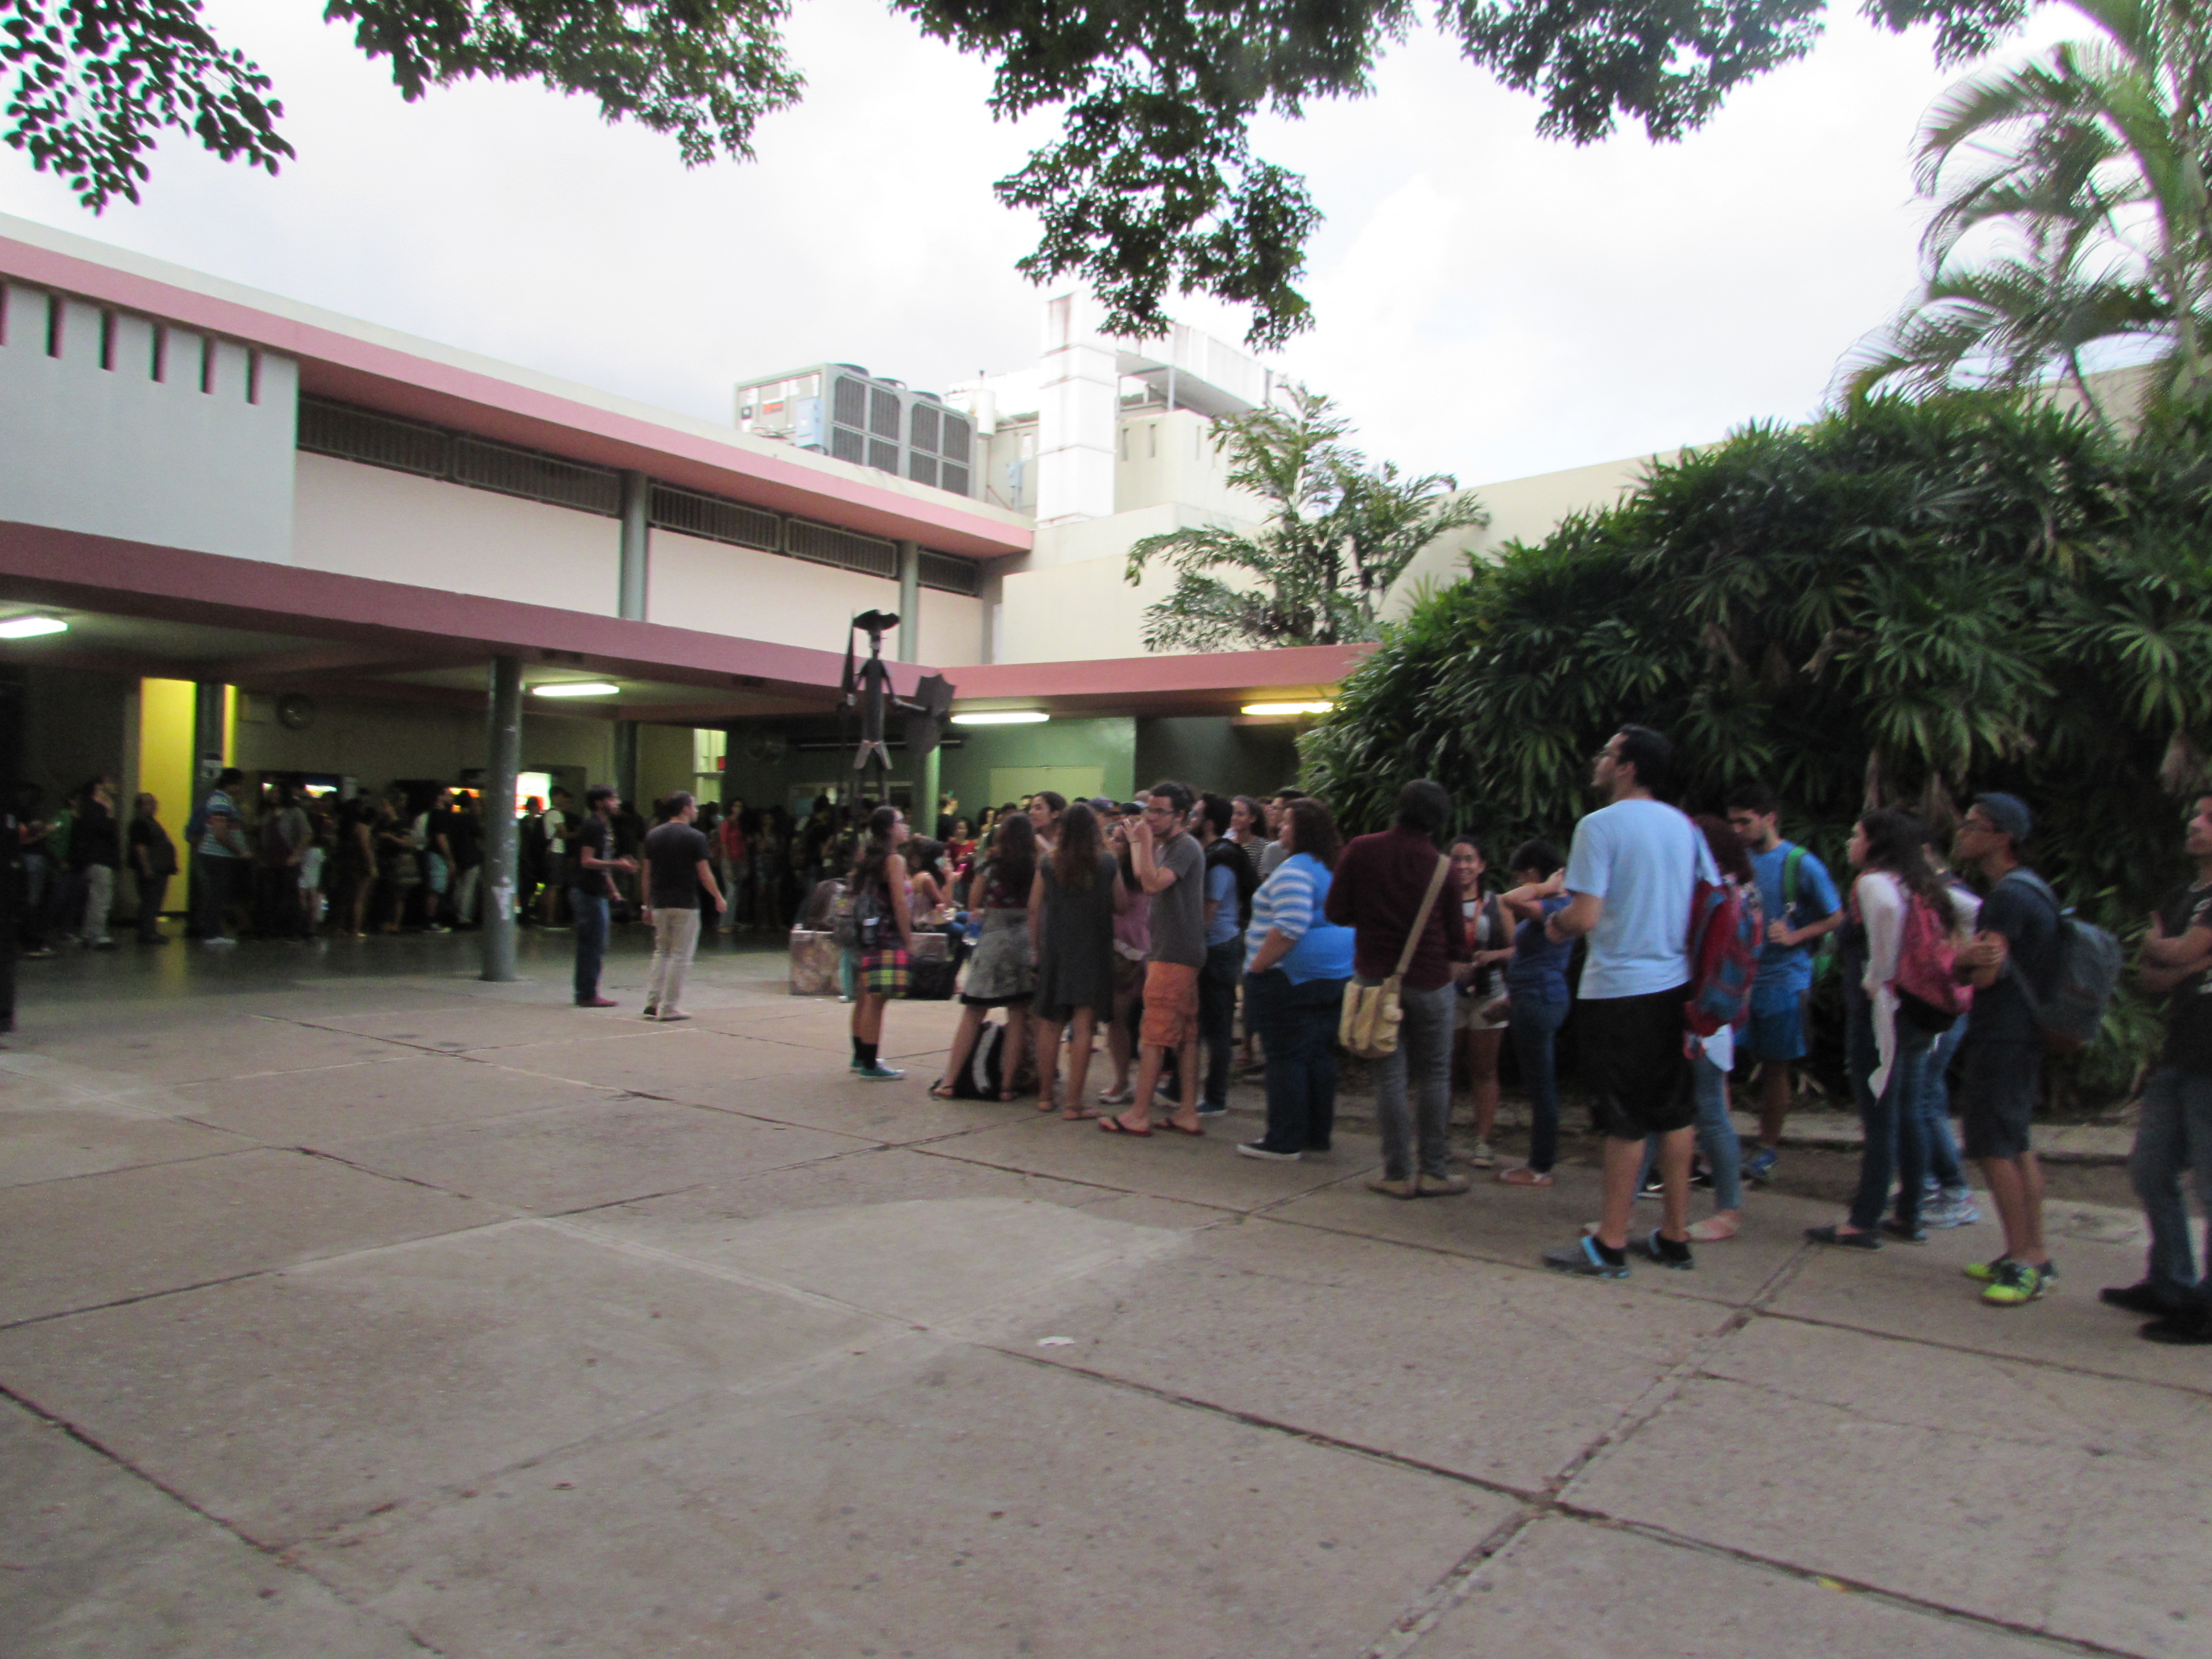 A panoramic shot of the Chardon Lobby where a lot of people can be seen interacting while waiting in line for the show.